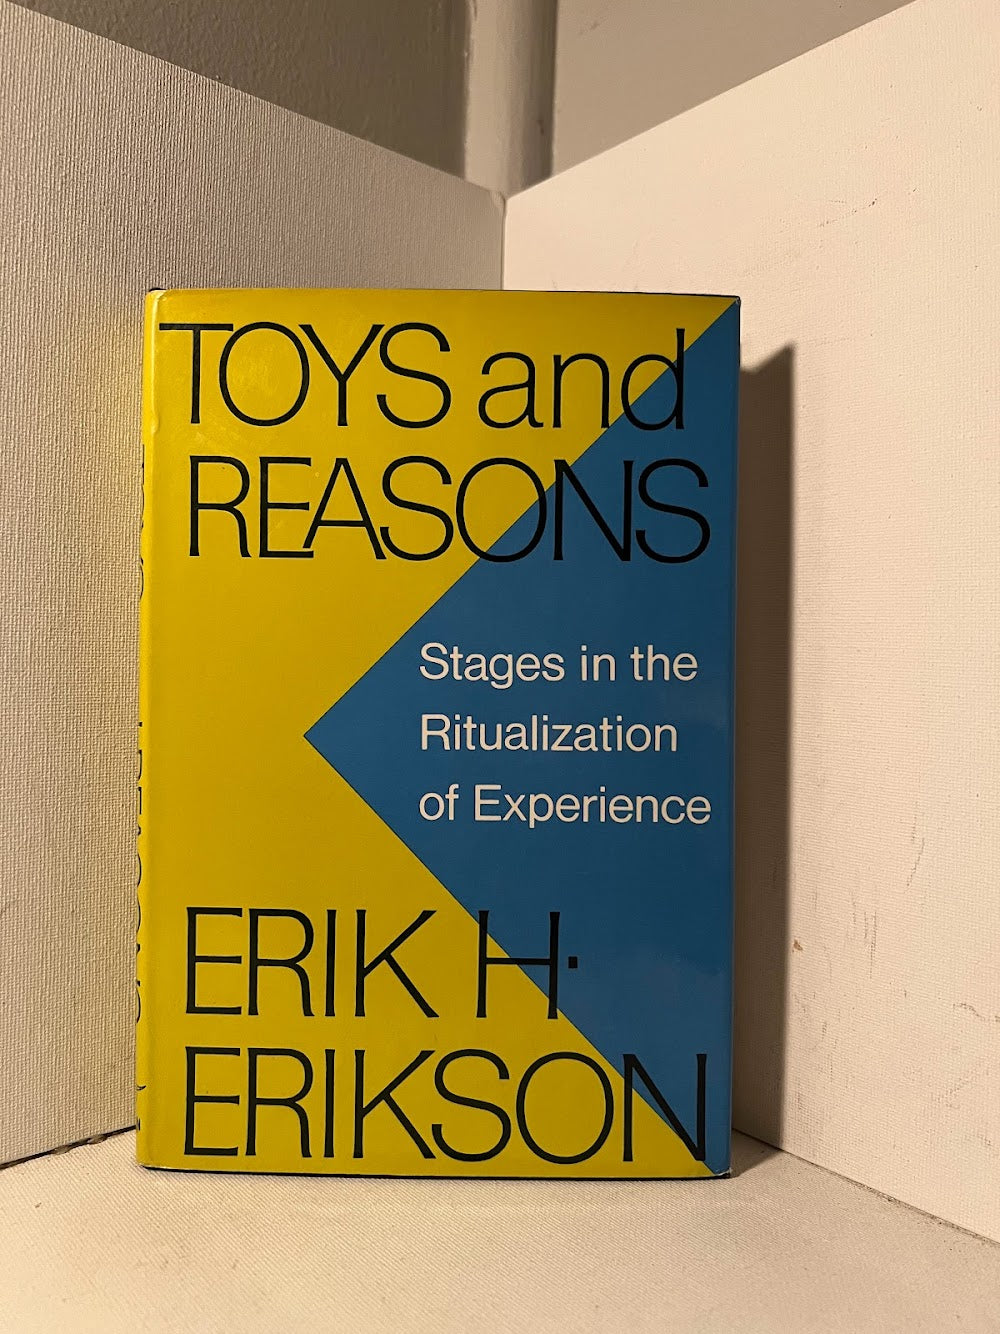 Toys and Reasons by Erik Erikson